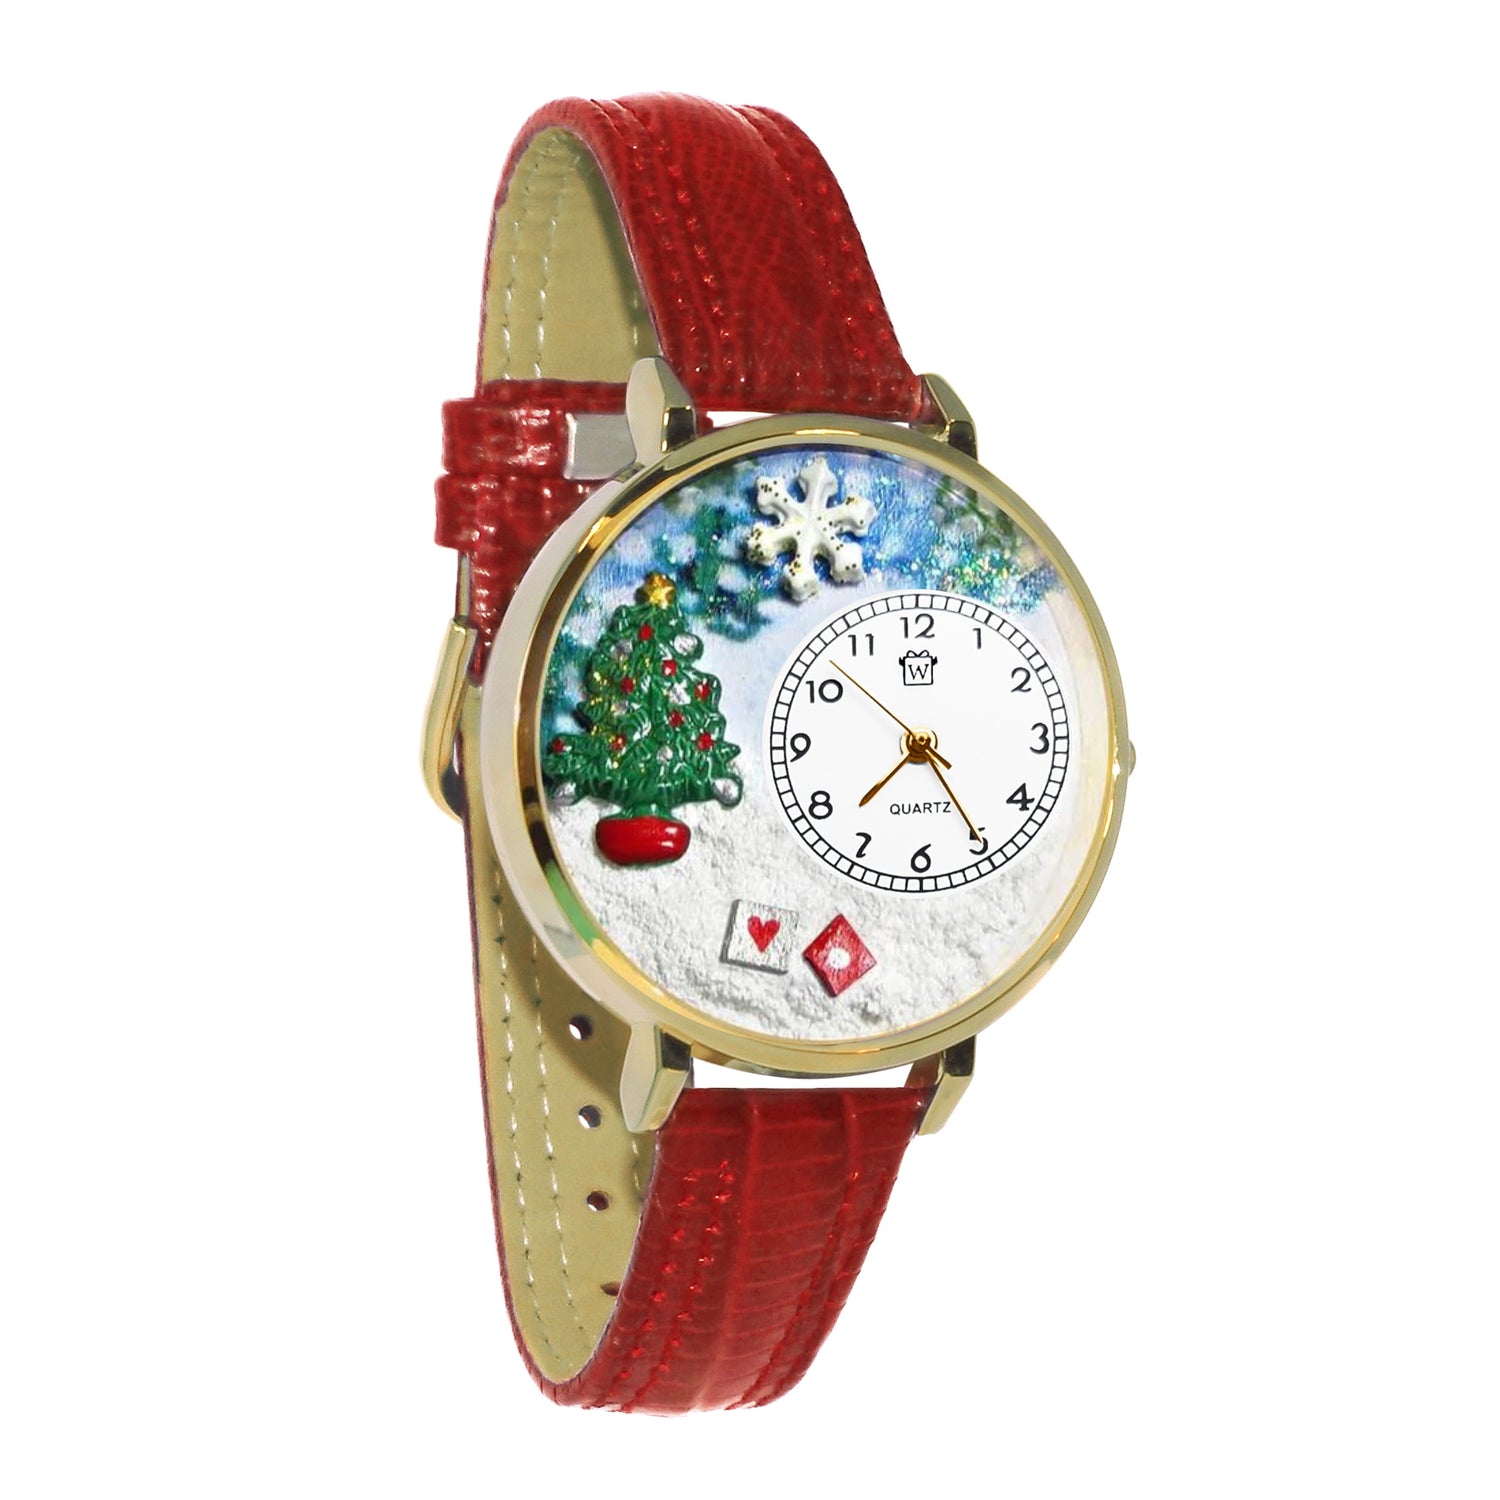 Whimsical Gifts | Christmas Tree 3D Watch Large Style | Handmade in USA | Holiday & Seasonal Themed | Christmas | Novelty Unique Fun Miniatures Gift | Gold Finish Red Leather Watch Band